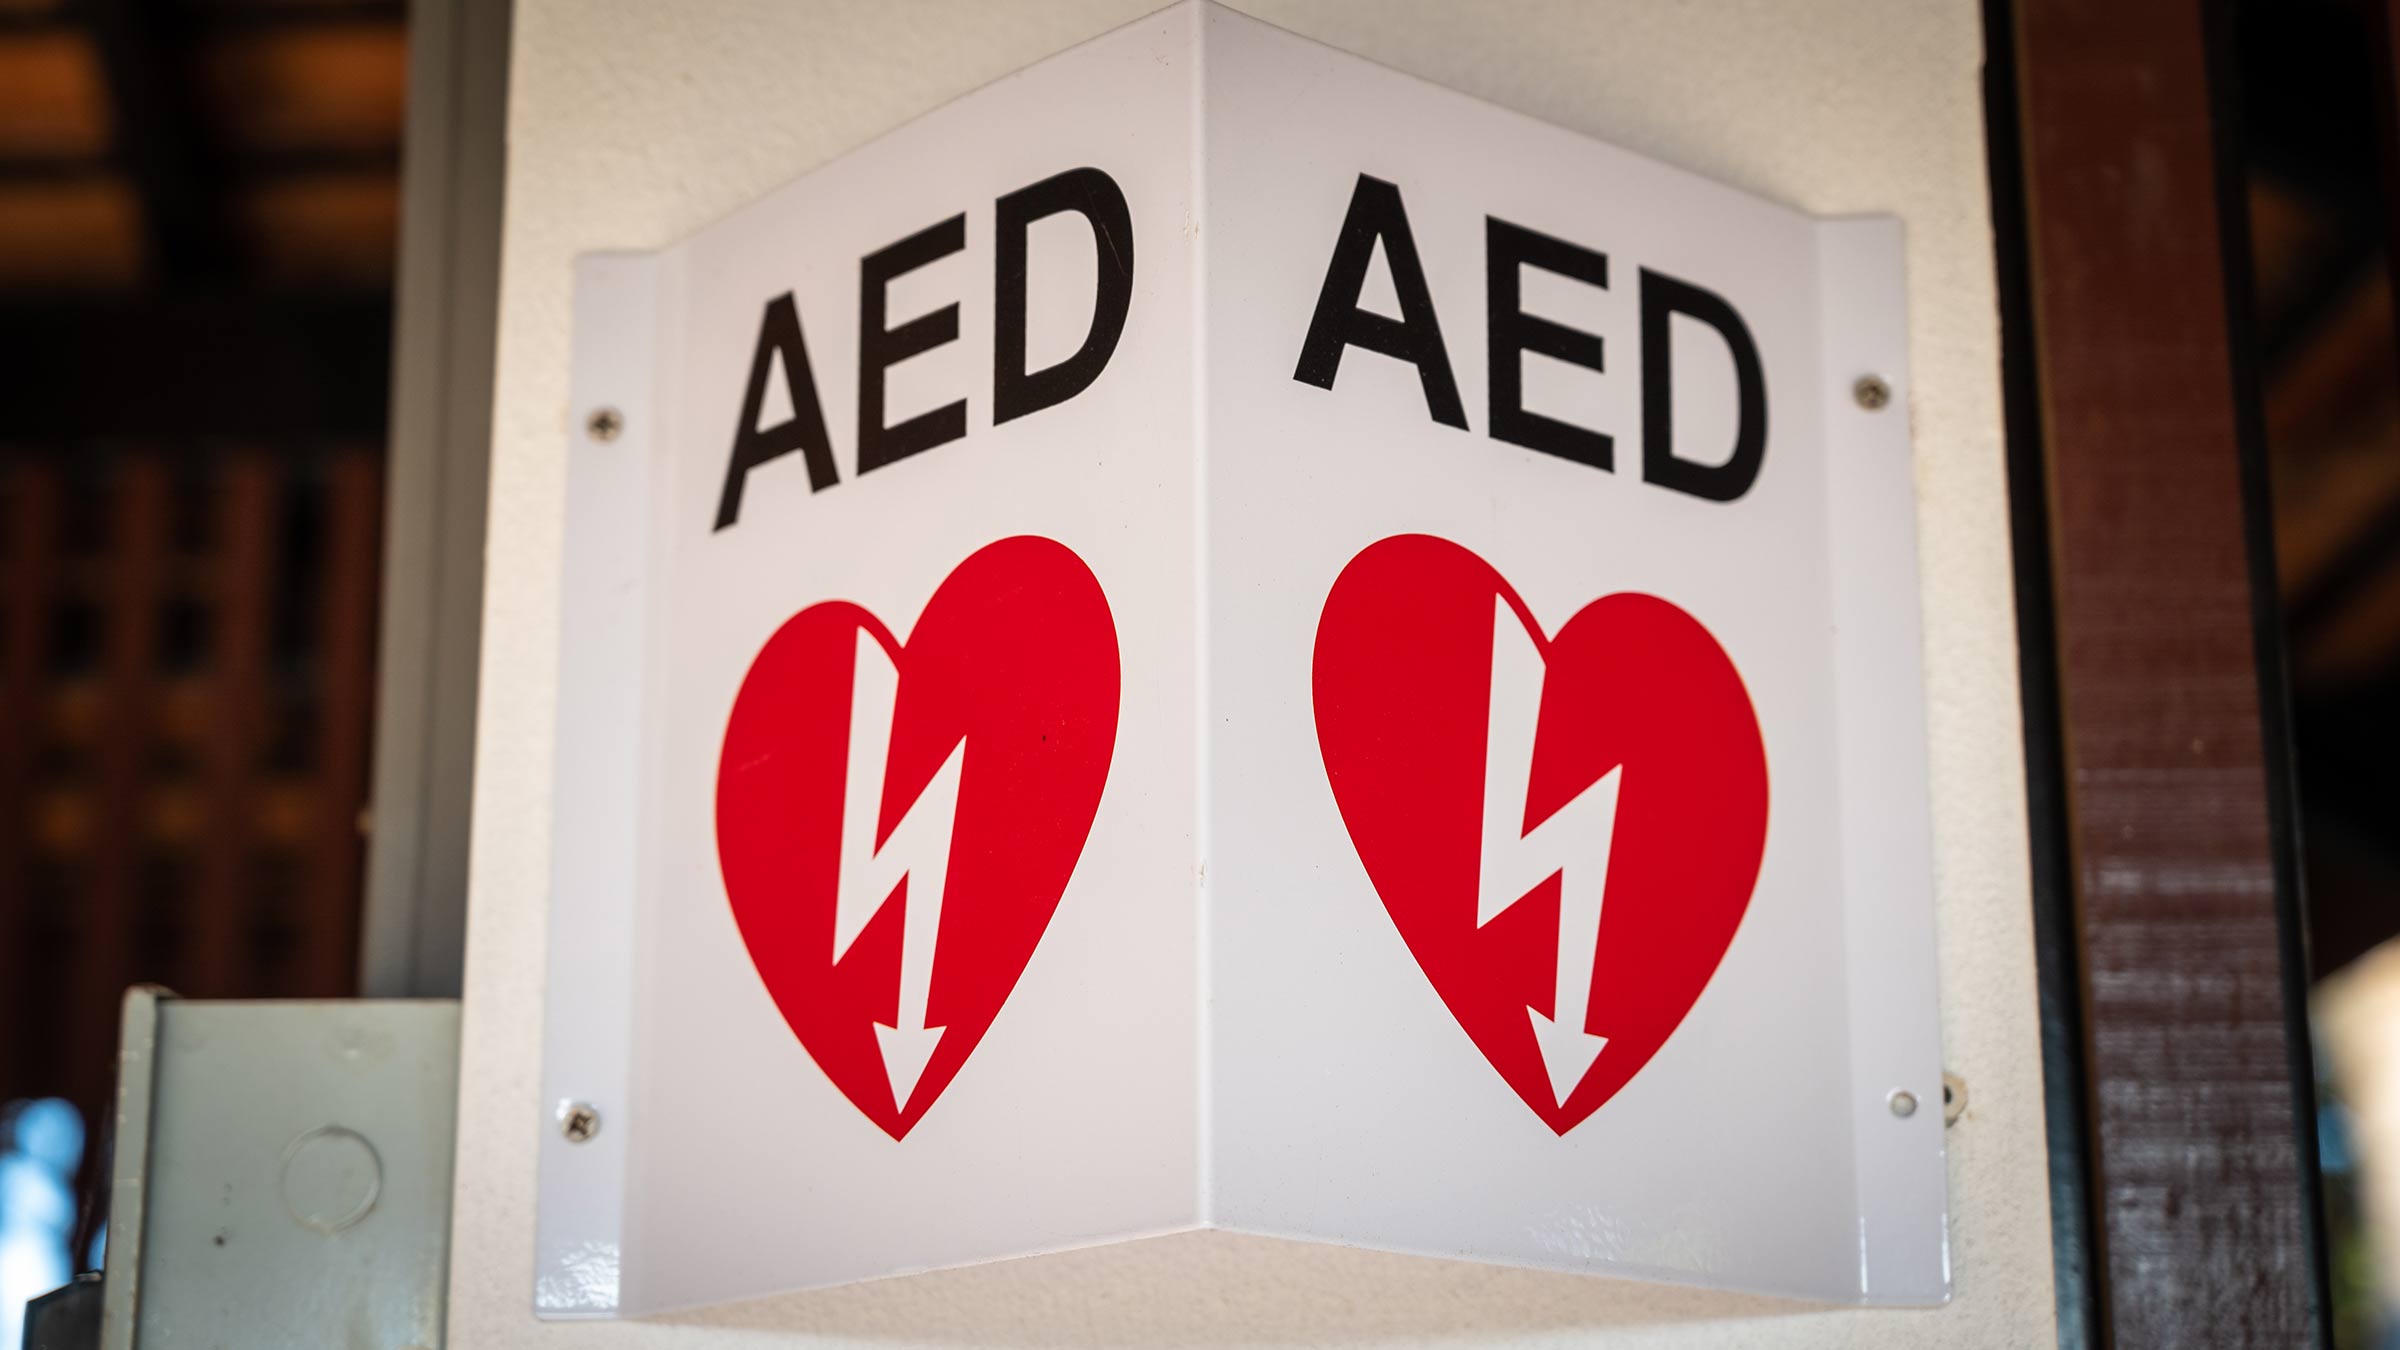 AED symbol on a sign pointing to where an AED would be located in a public space